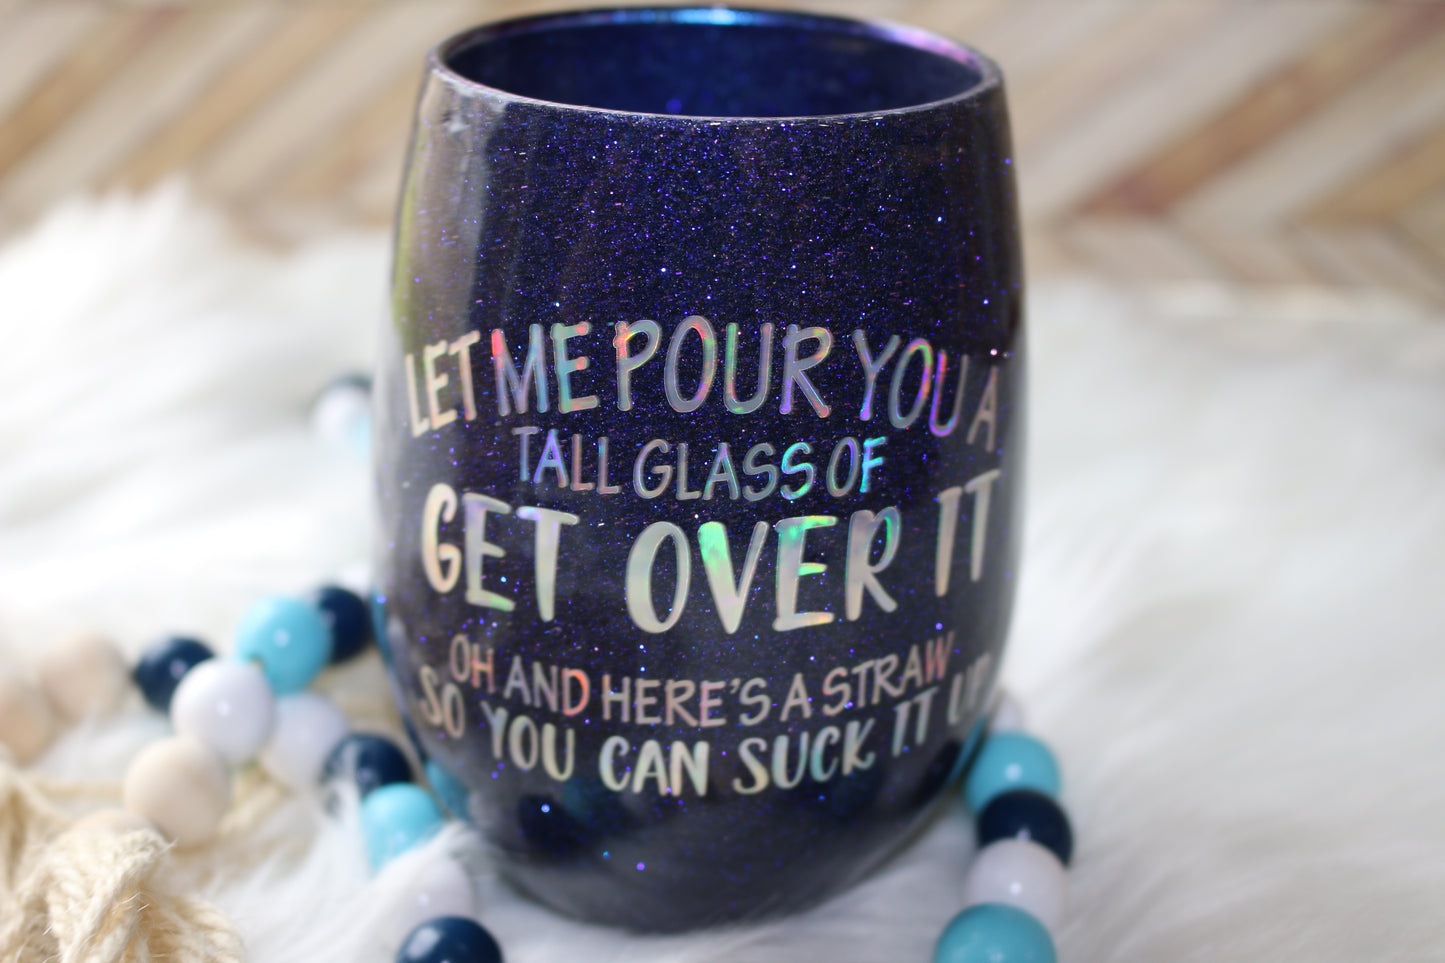 Get Over it...Wine glass